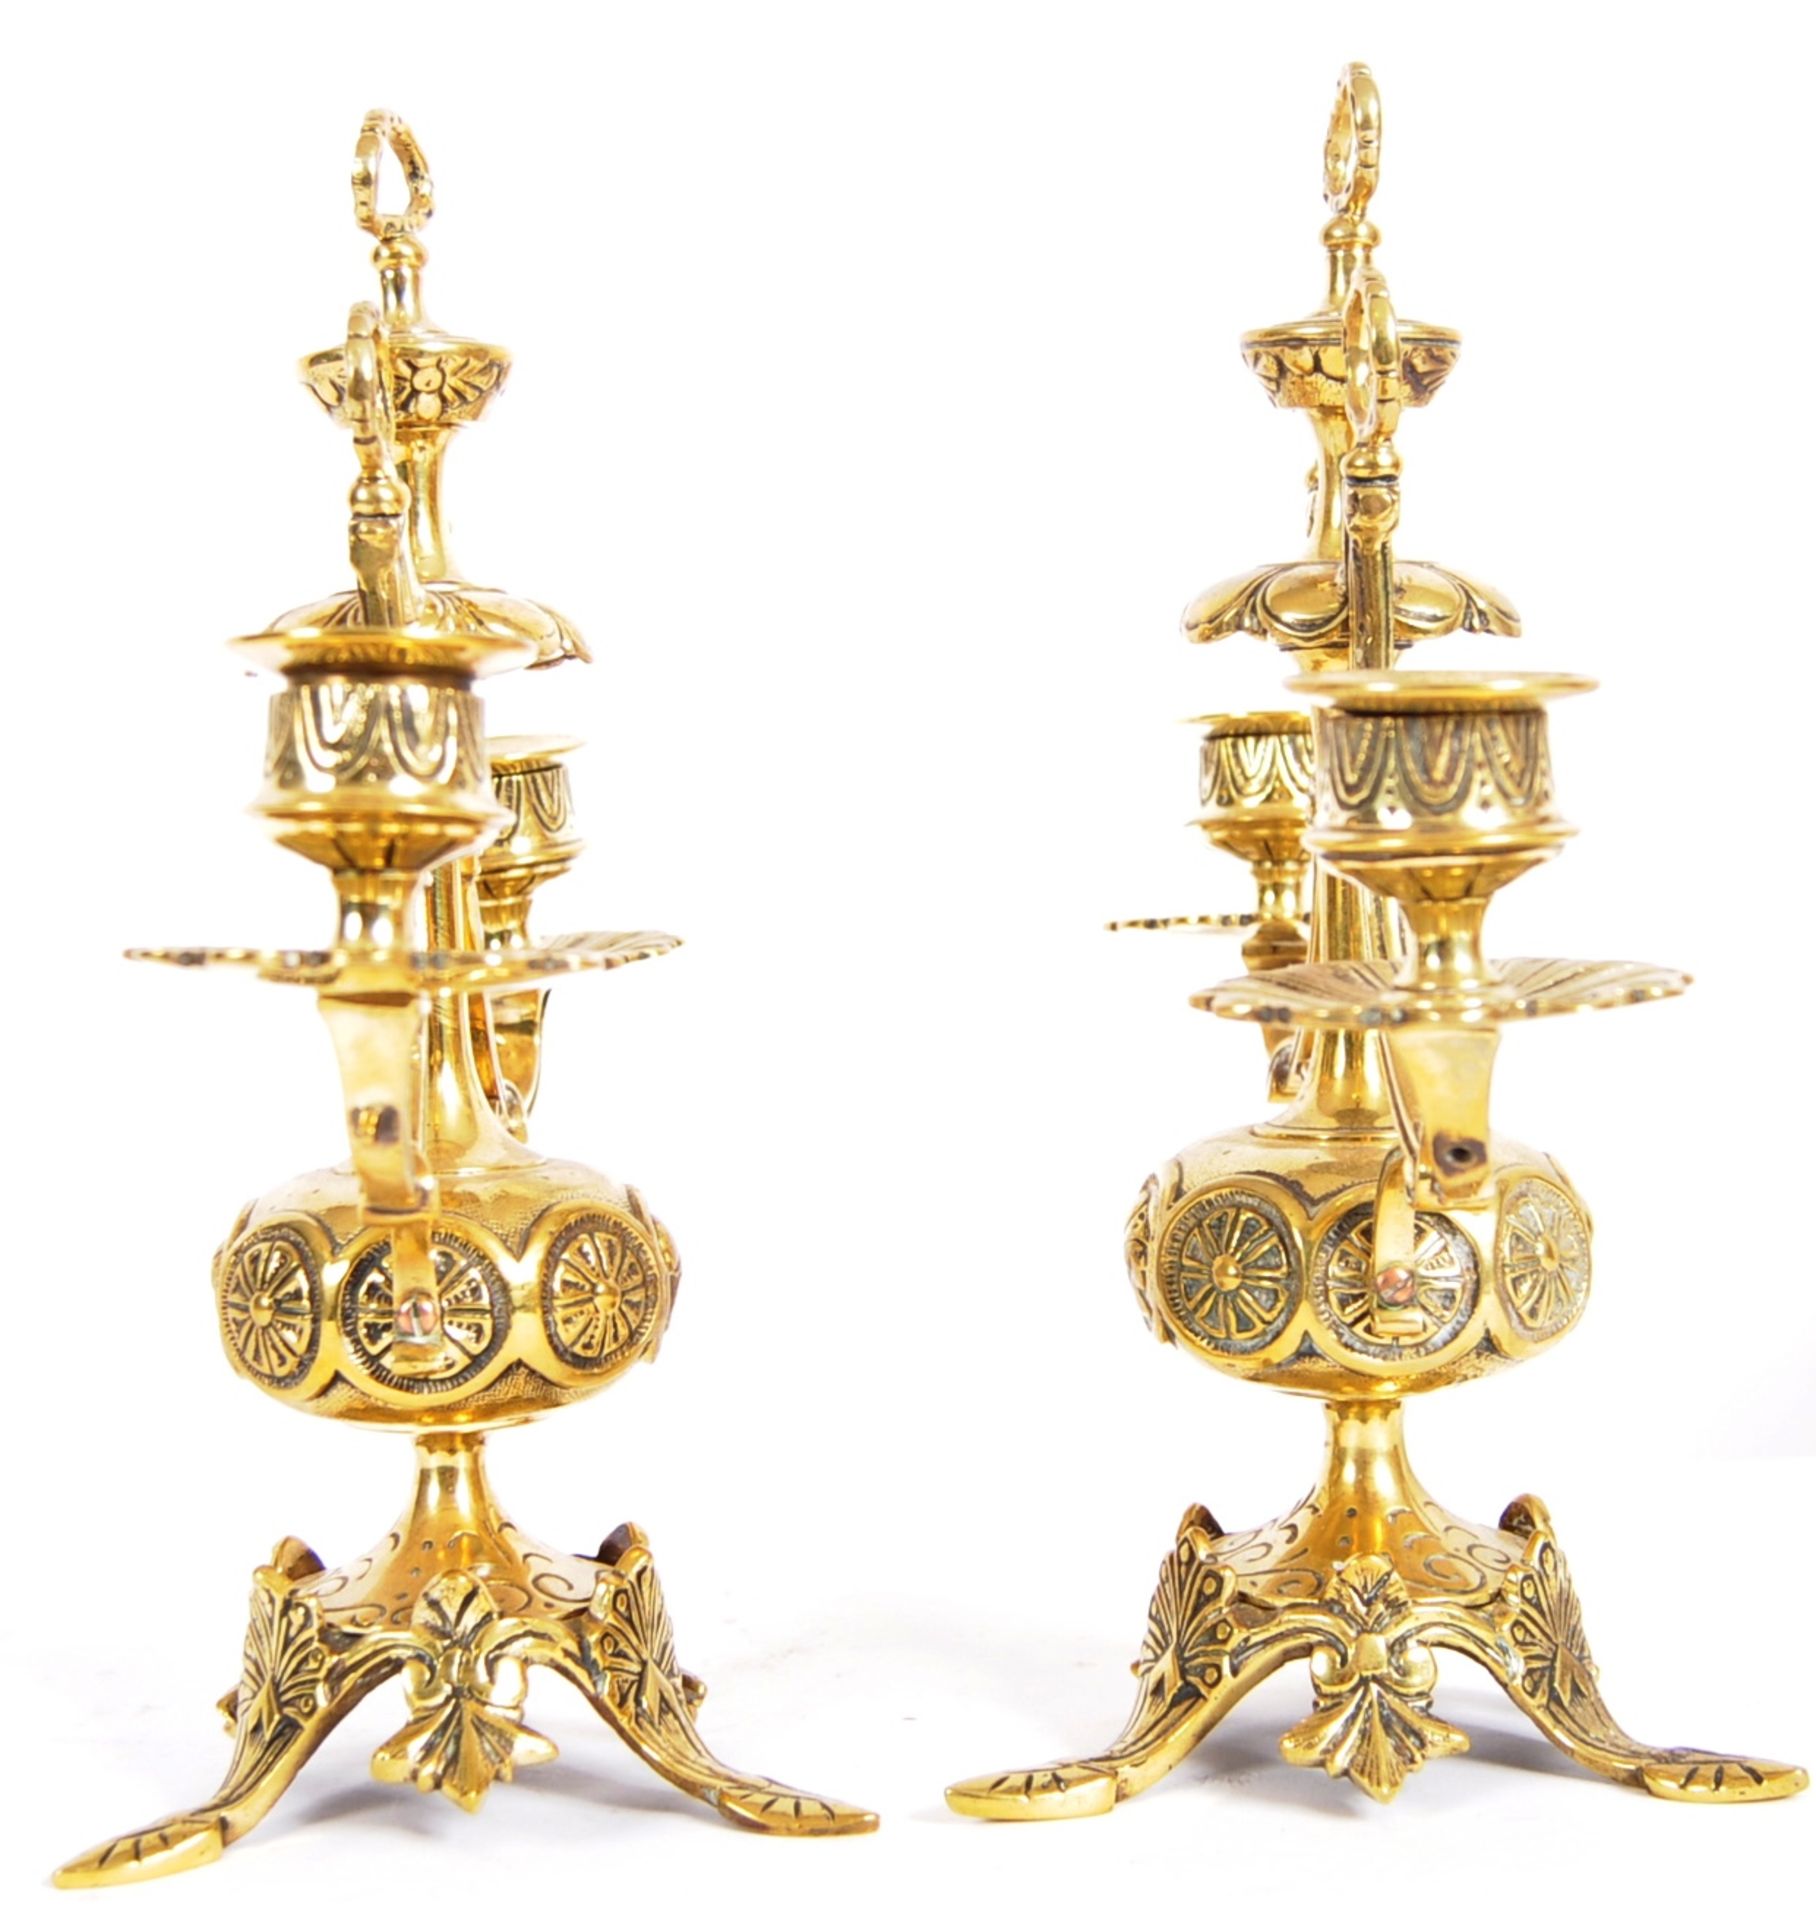 PAIR OF 19TH CENTURY BRASS TWIN SCONCE CANDELABRA - Image 2 of 7